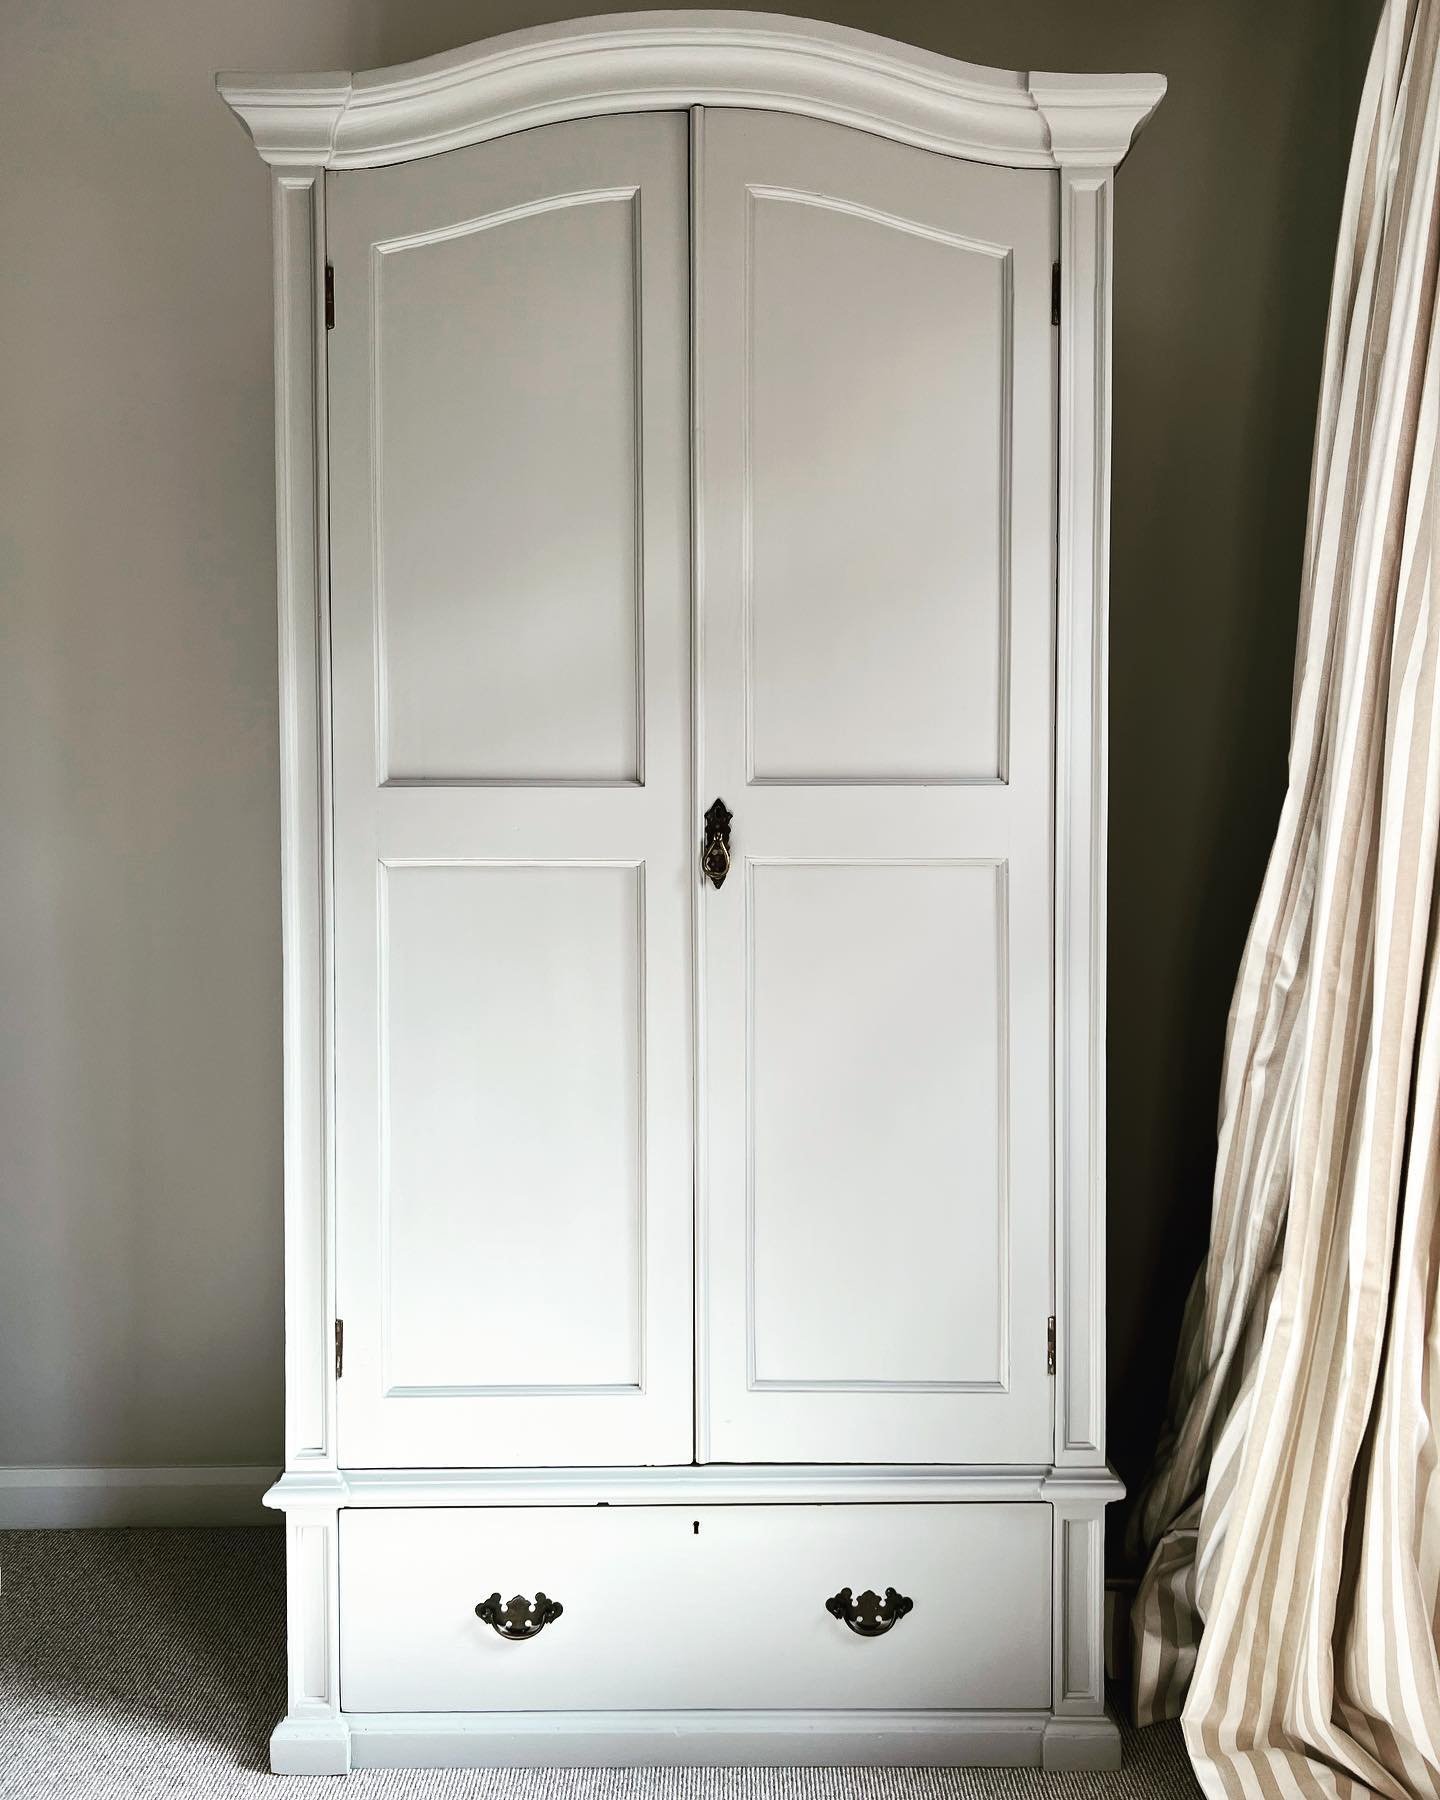 Sometimes an antique piece of furniture just needs a lick of paint to bring it back to life.. swipe for before pic! 

#handpaintedfurniture #specialistpainting #handpainted #antiquewardrobe #paintedfurniture #farrowandballpaviliongrey